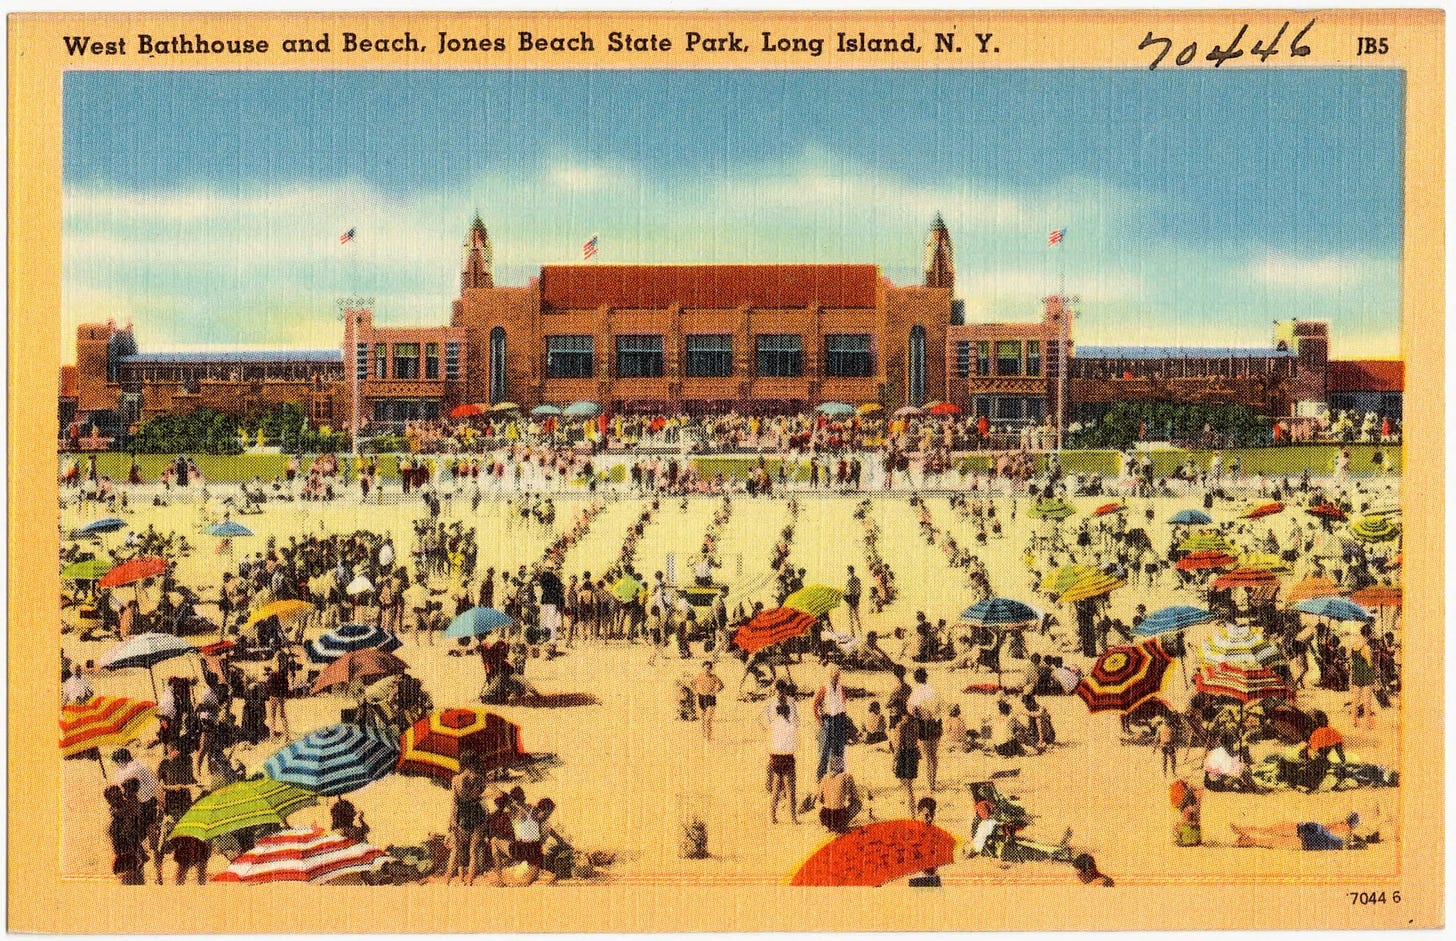 Scan of a mid-twentieth-century postcard depicting the West Bathhouse and Beach at Jones Beach State Park